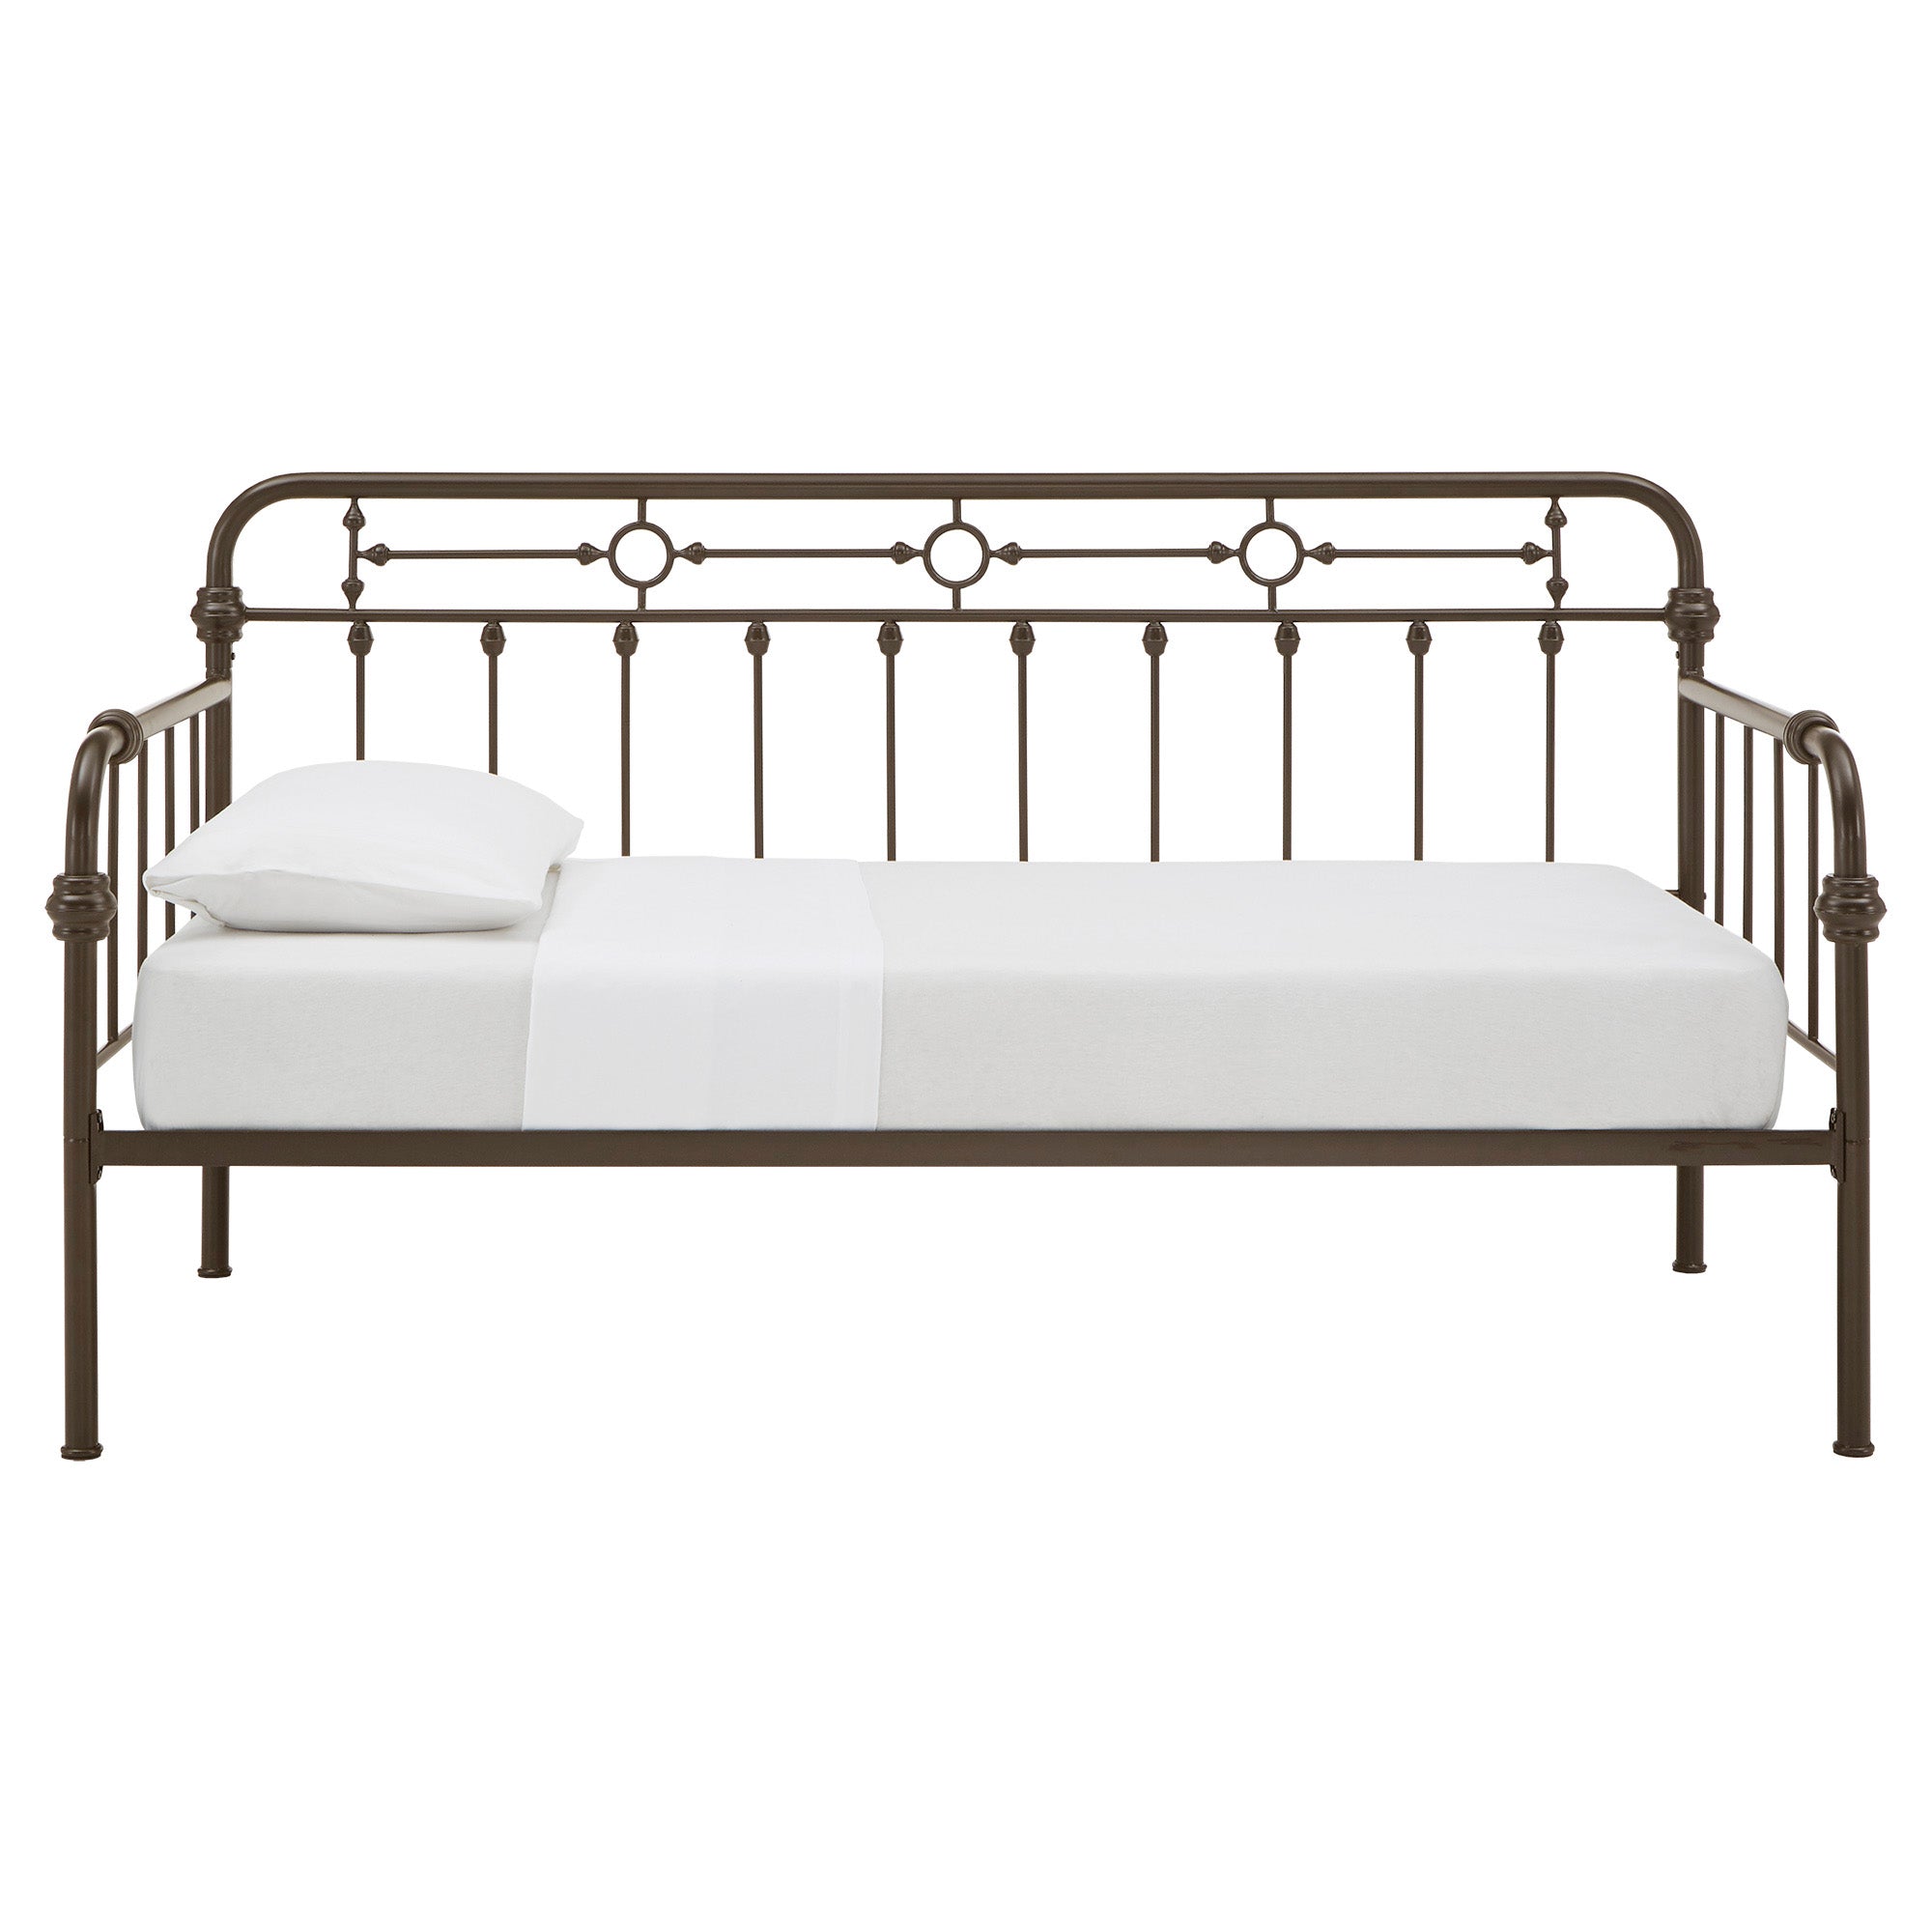 Antique Dark Bronze Metal Daybed - Twin Size, No Trundle